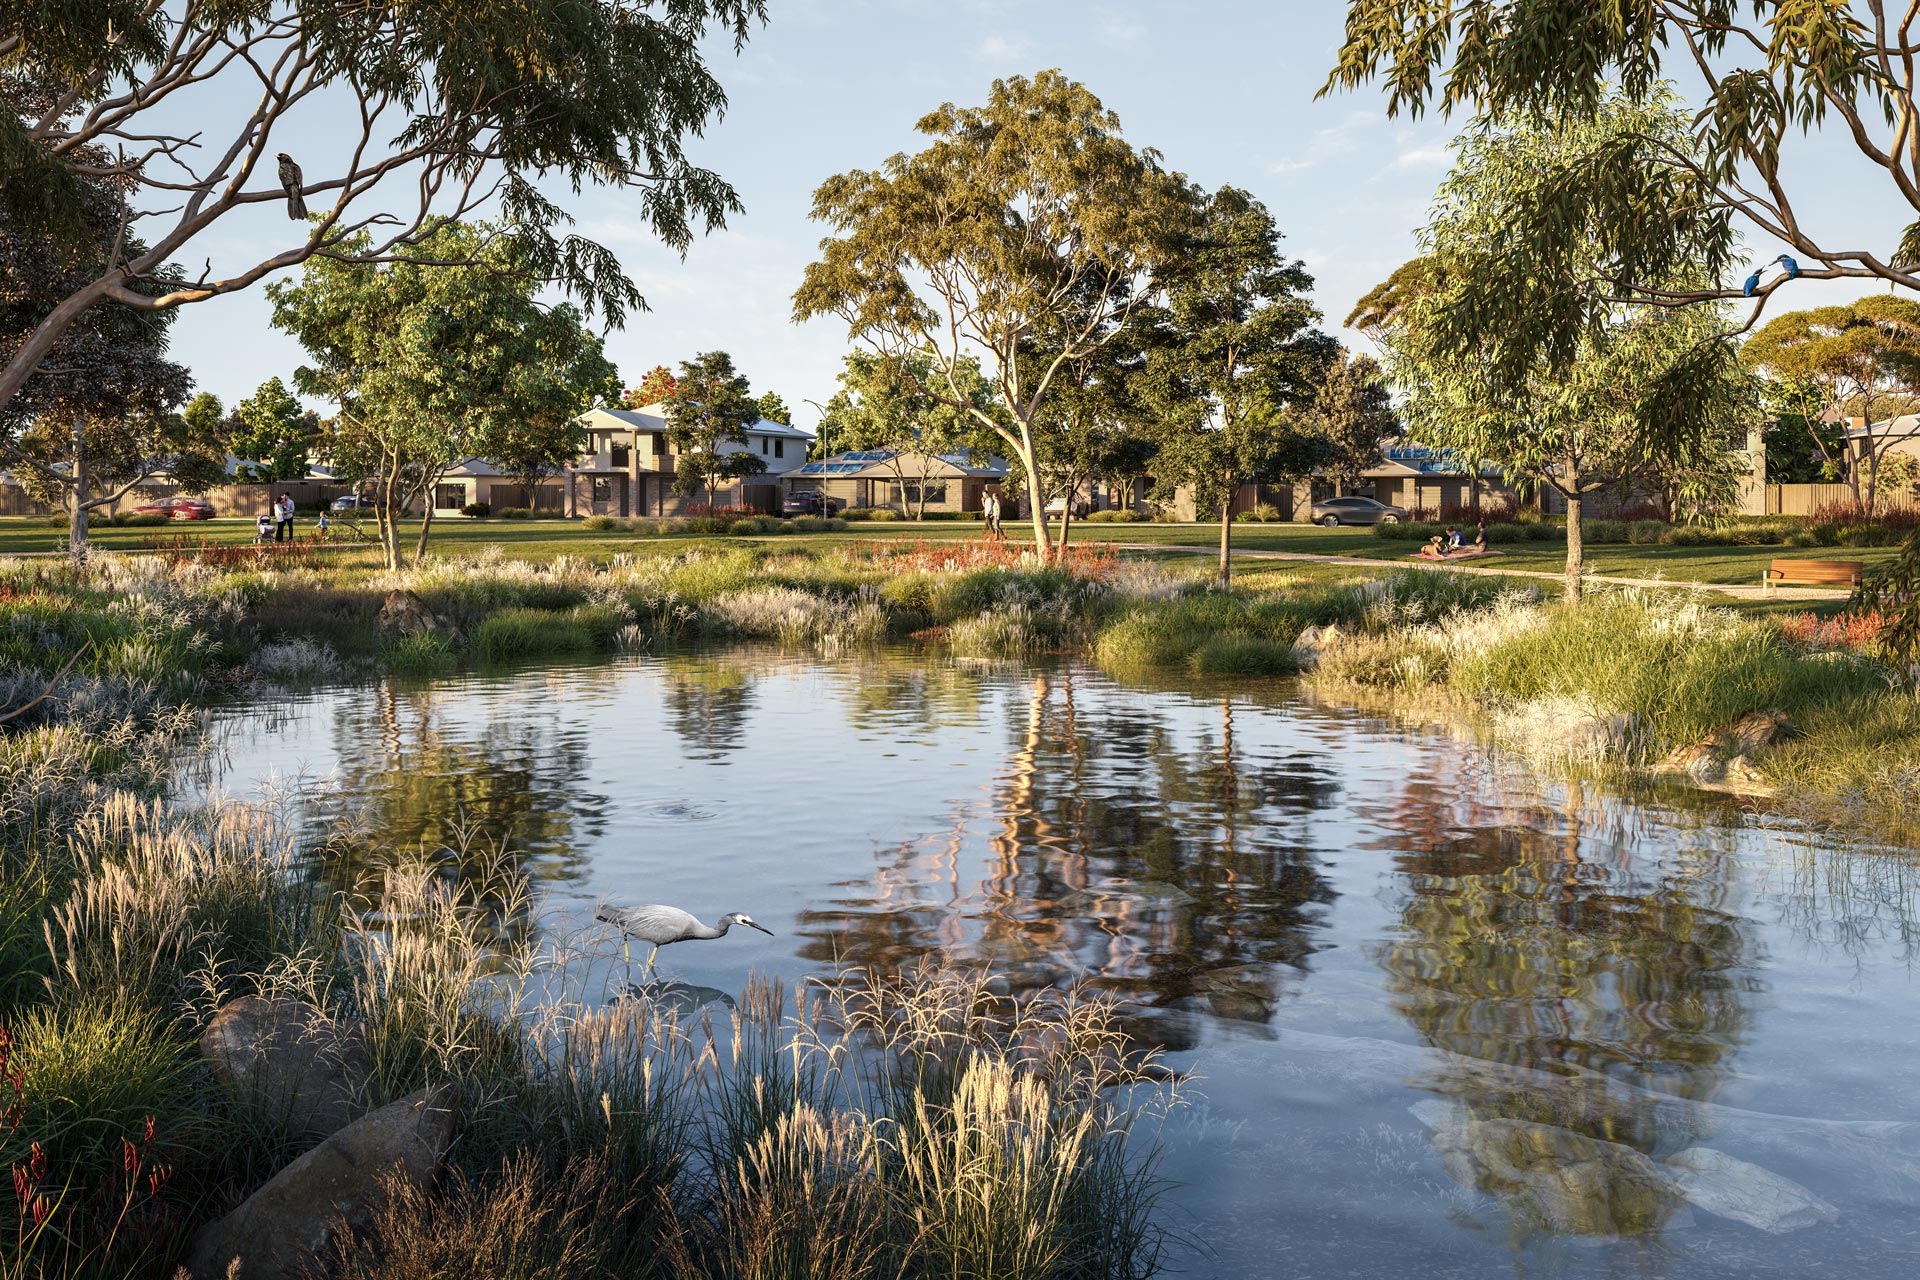 Meet the Team Behind Harli, the new 7 Star Community in Cranbourne West.